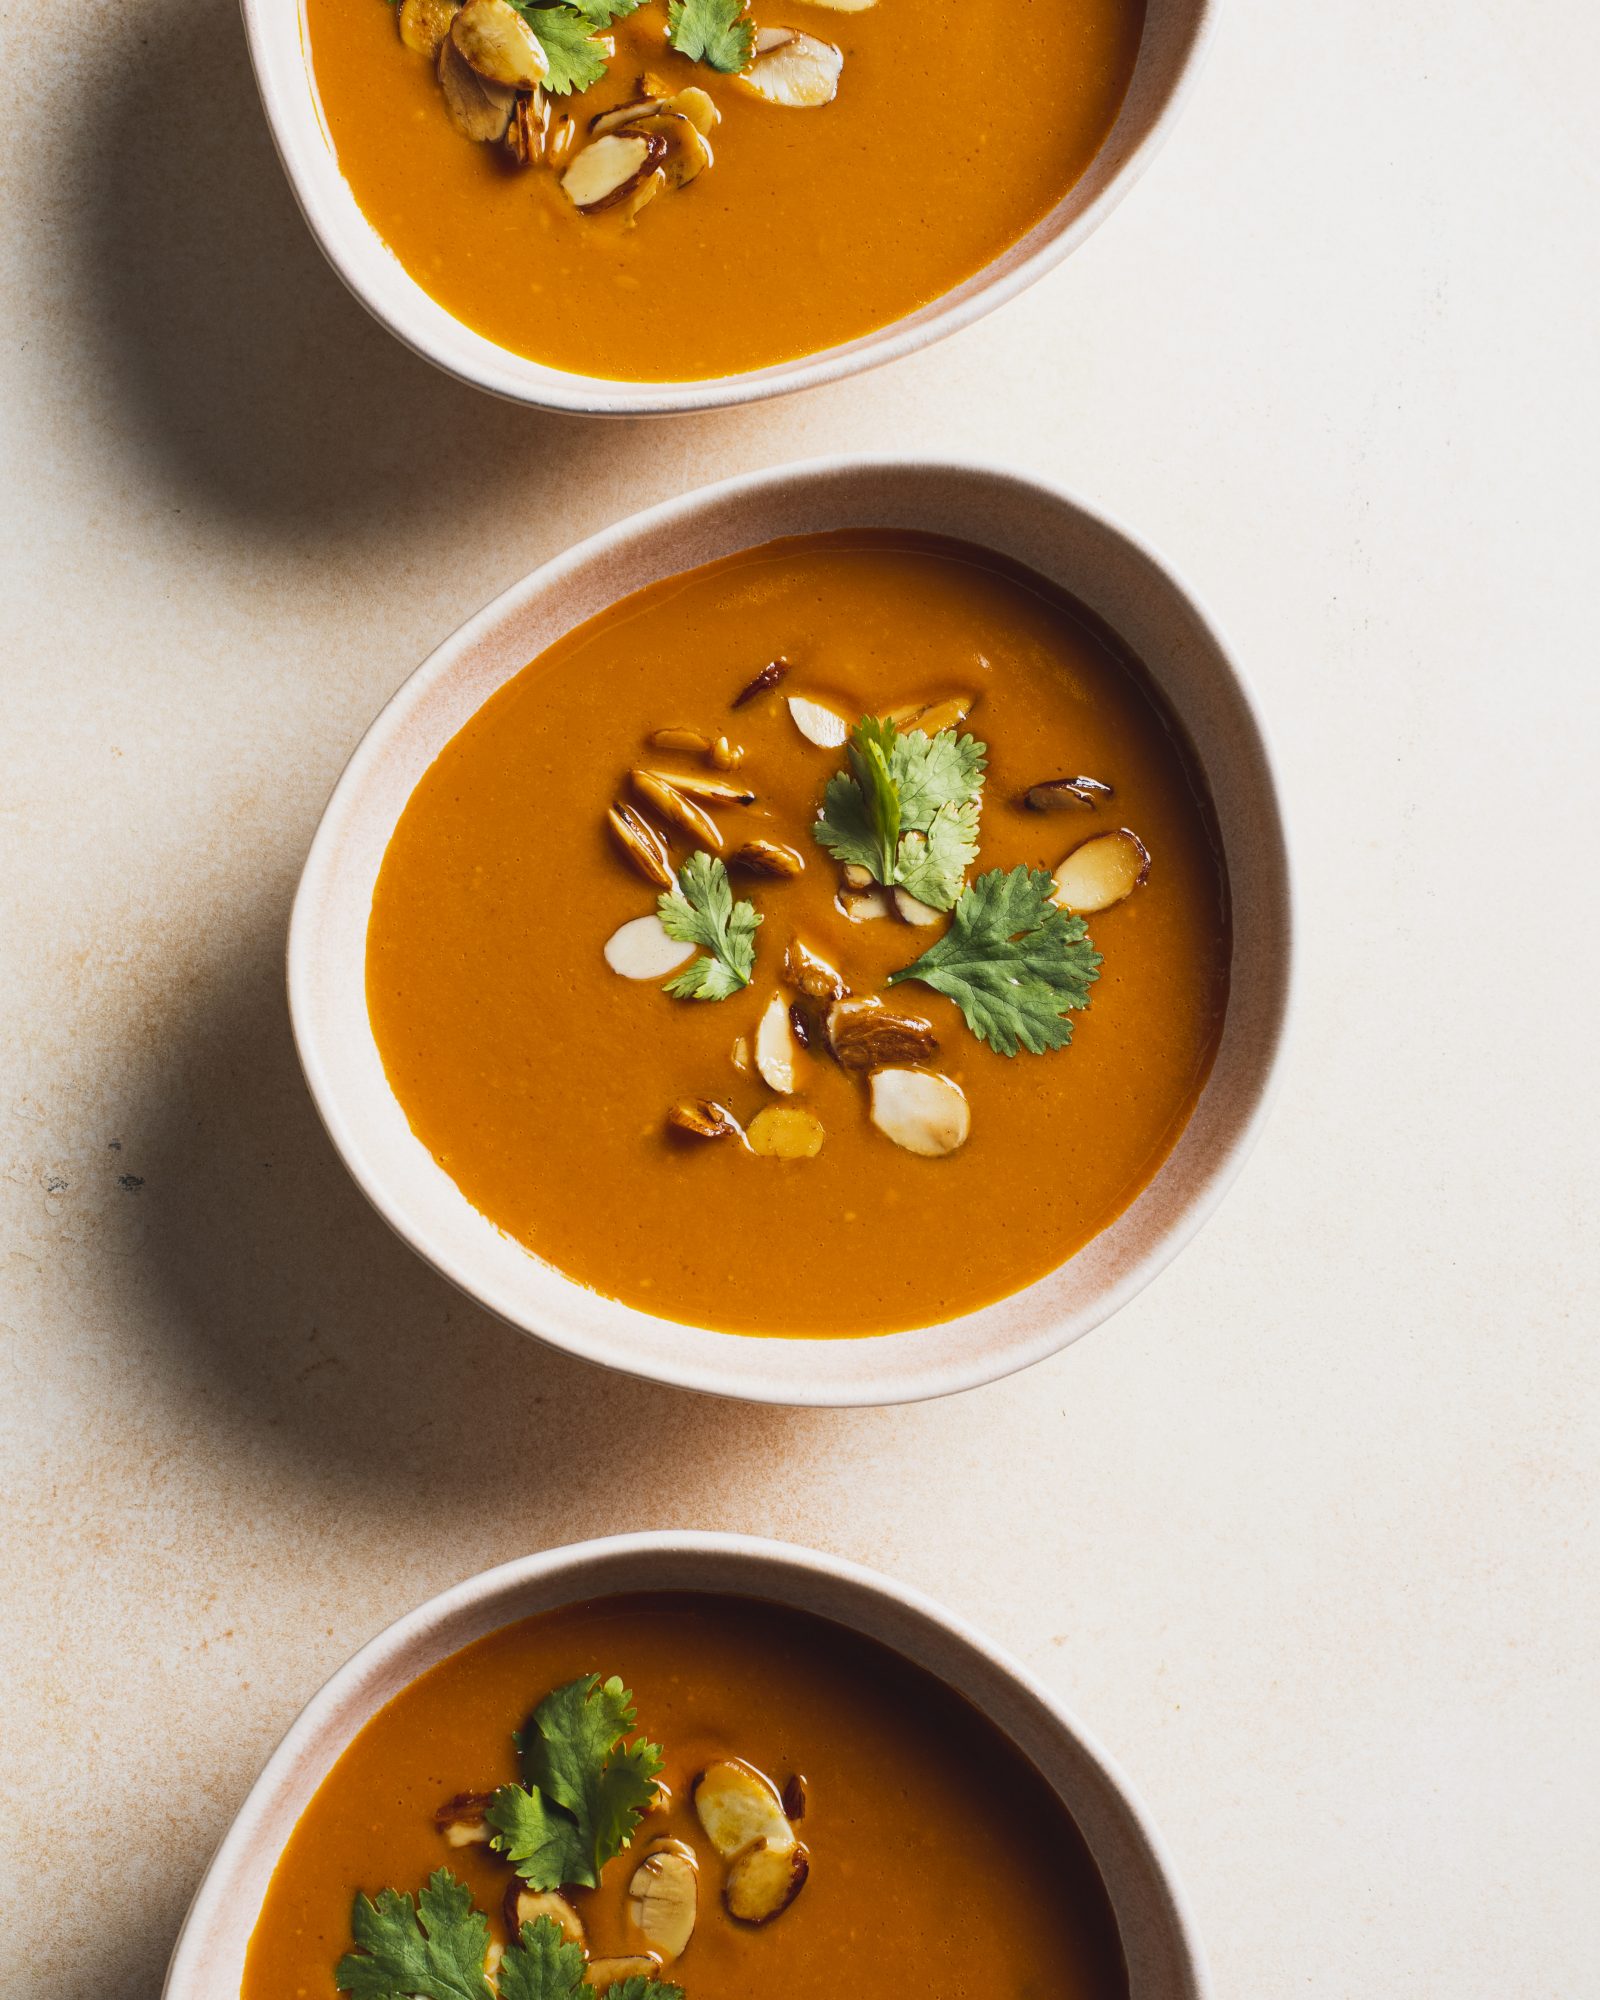 Double carrot soup fennel lime v